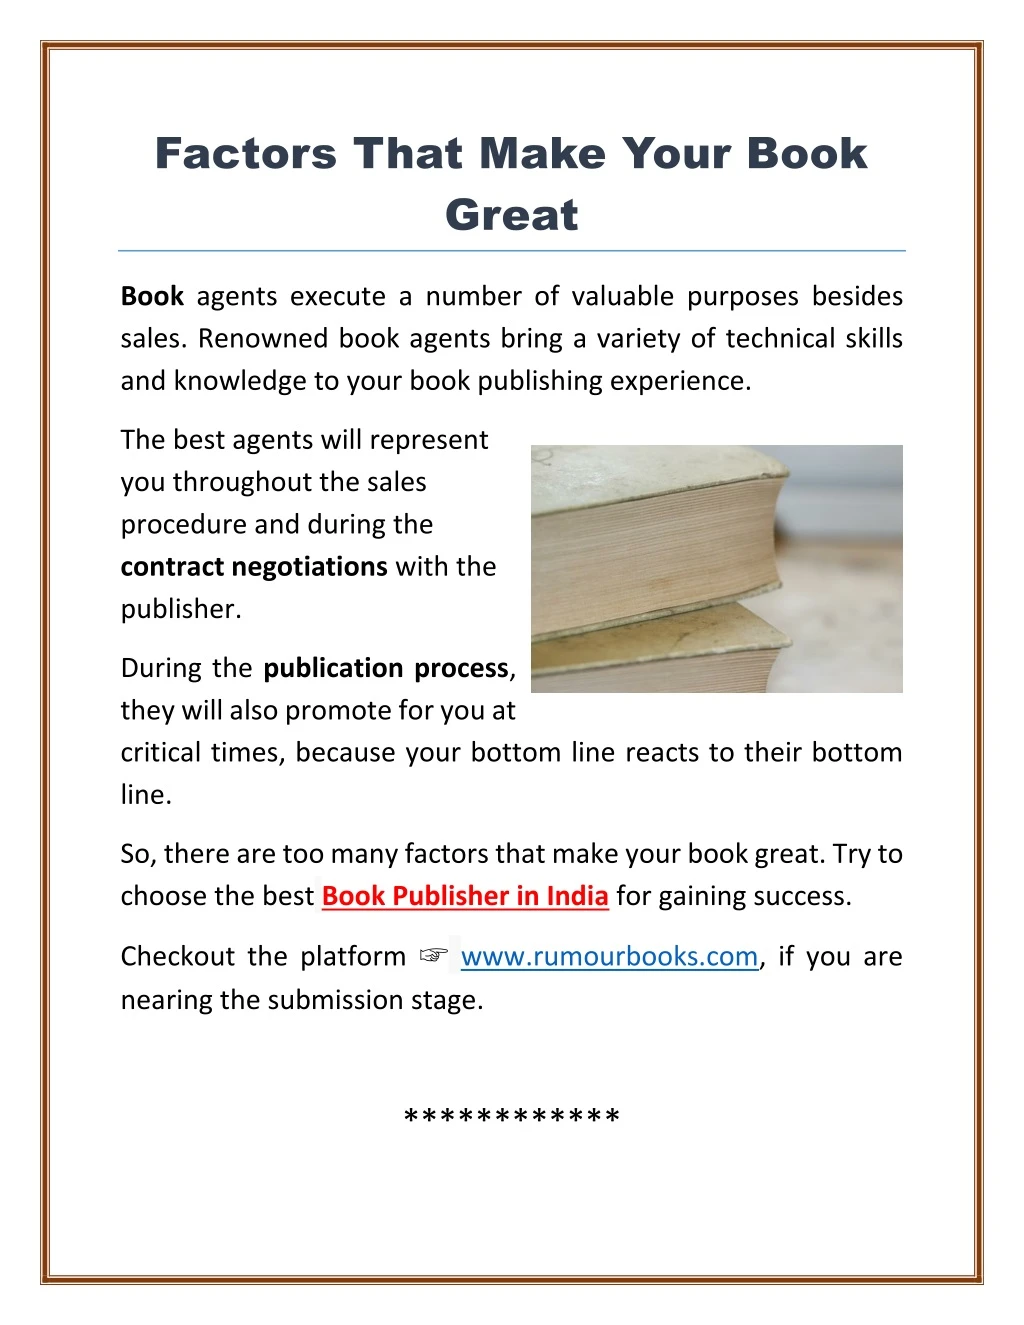 factors that make your book great